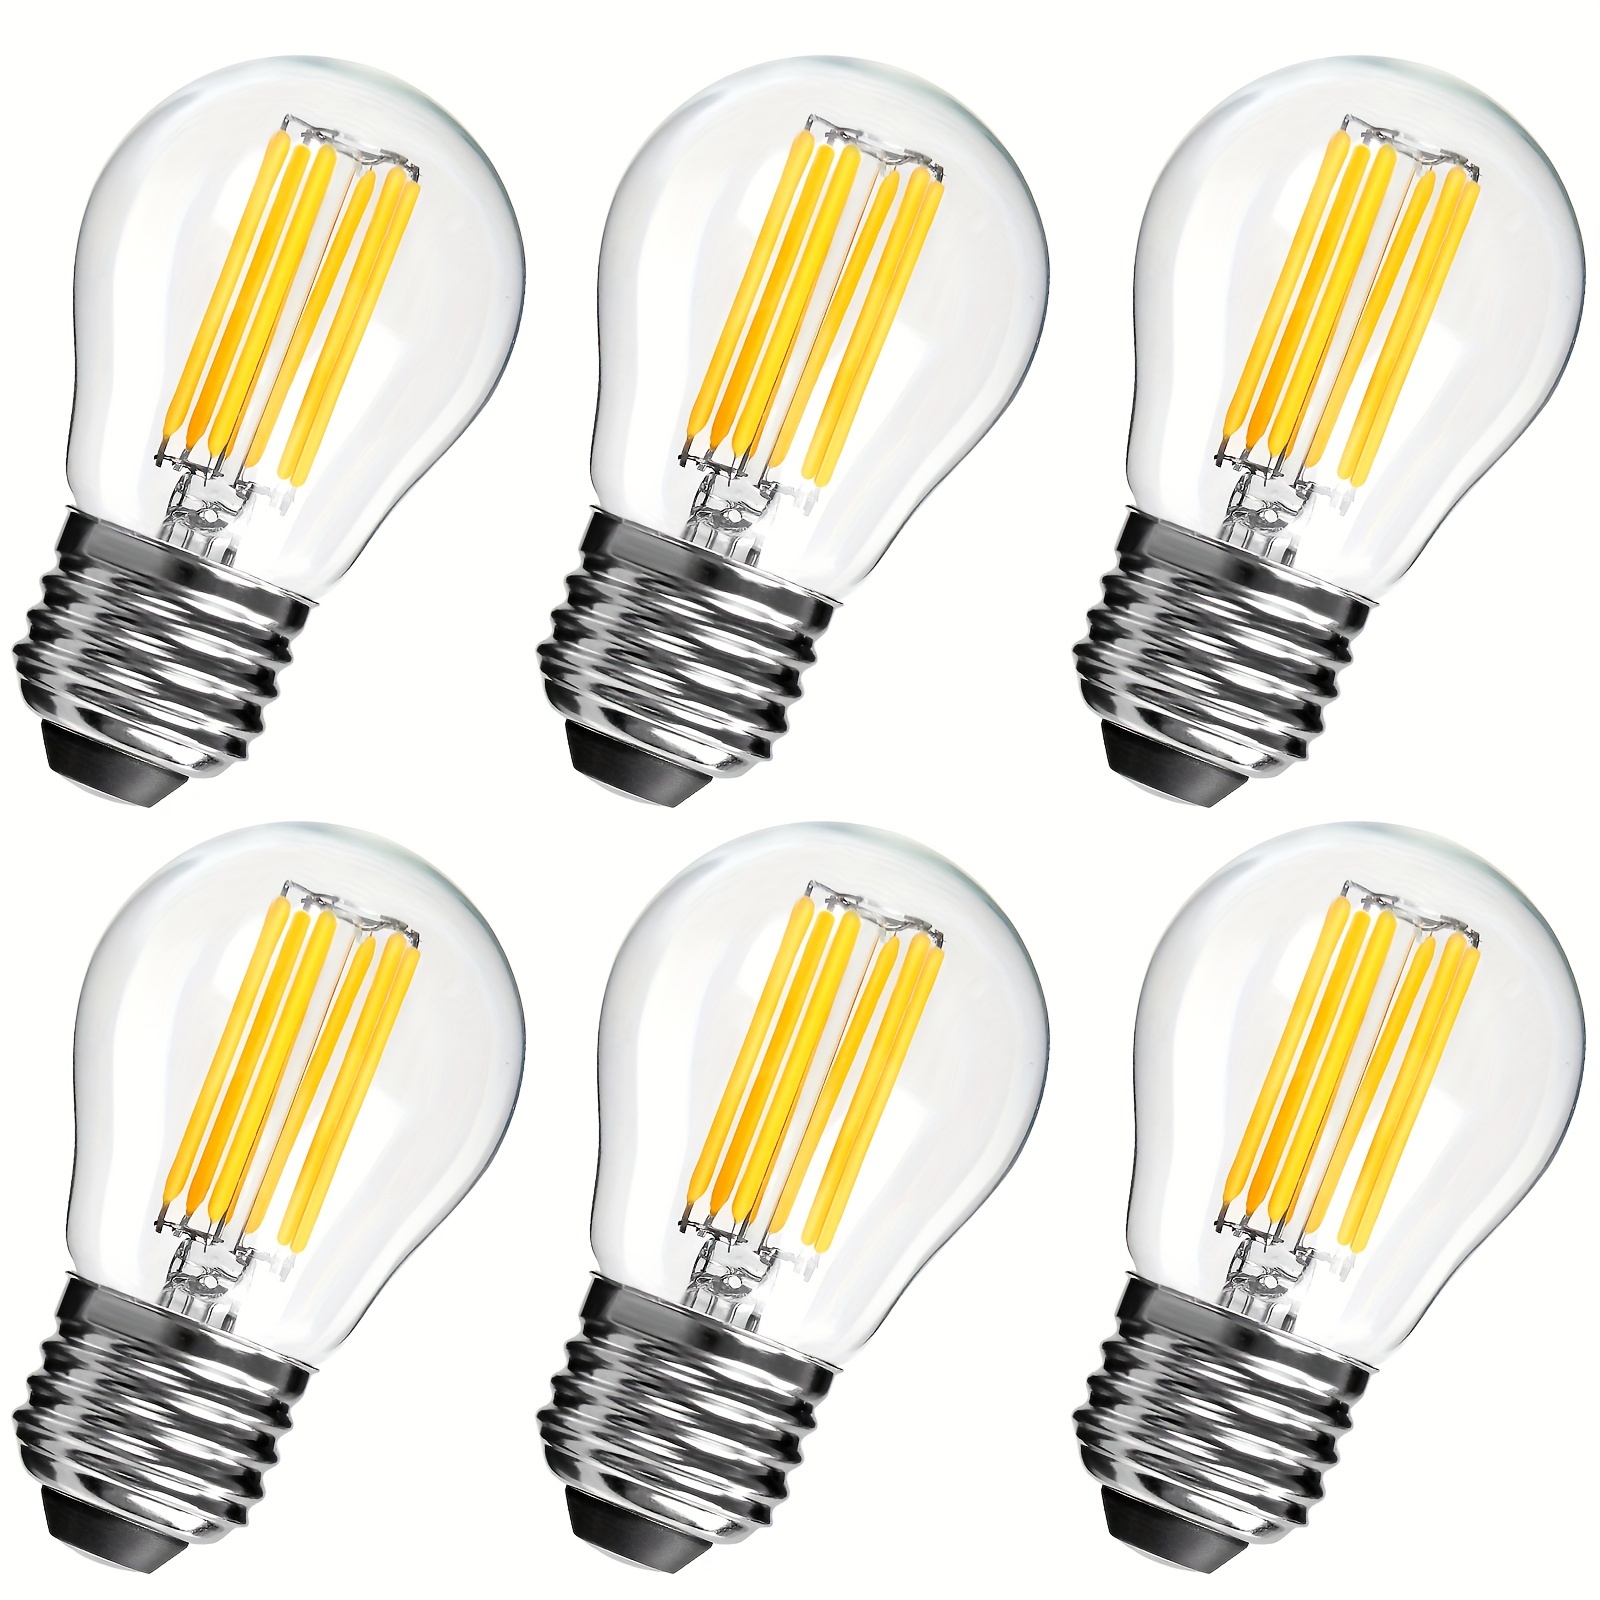 YDJoo E14 G45 LED Edison Bulb 6W LED Filament Light Bulb 60W Equivalent  Warm White 2700K Clear Glass Decorative Vintage Bulb Dimmable for Pendent